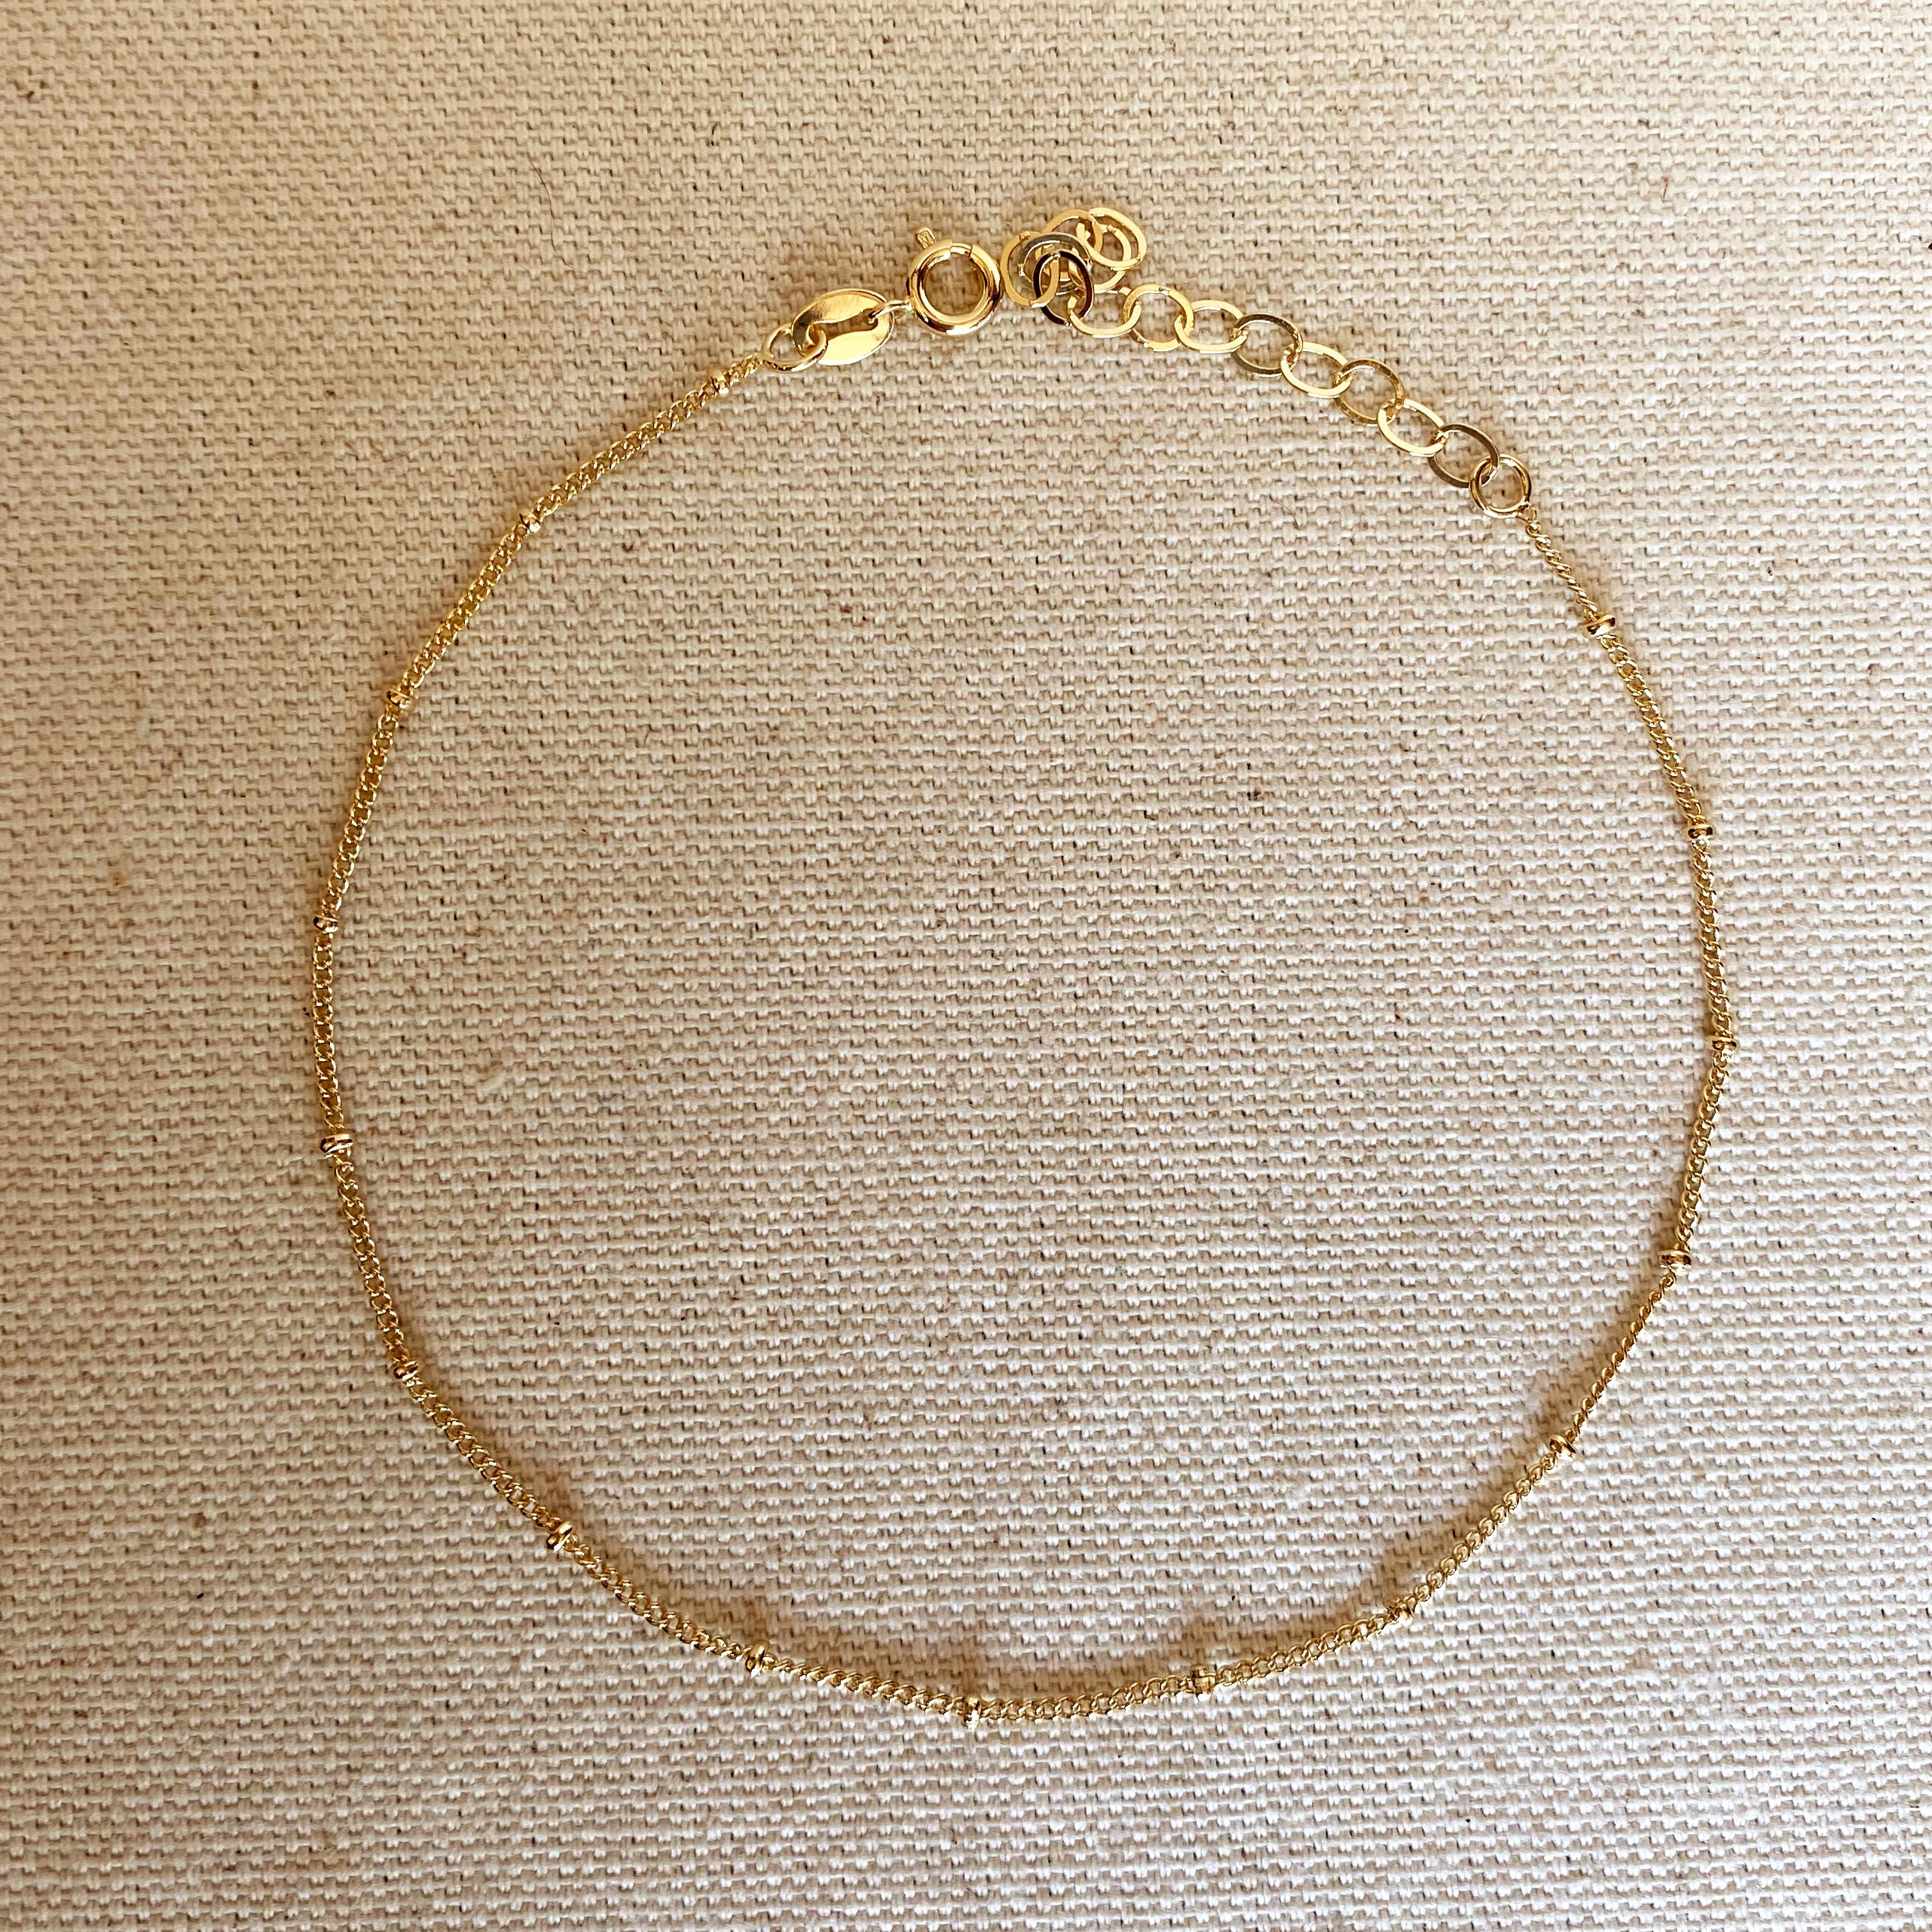 GoldFi Anklets Collection - Premium Gold-filled